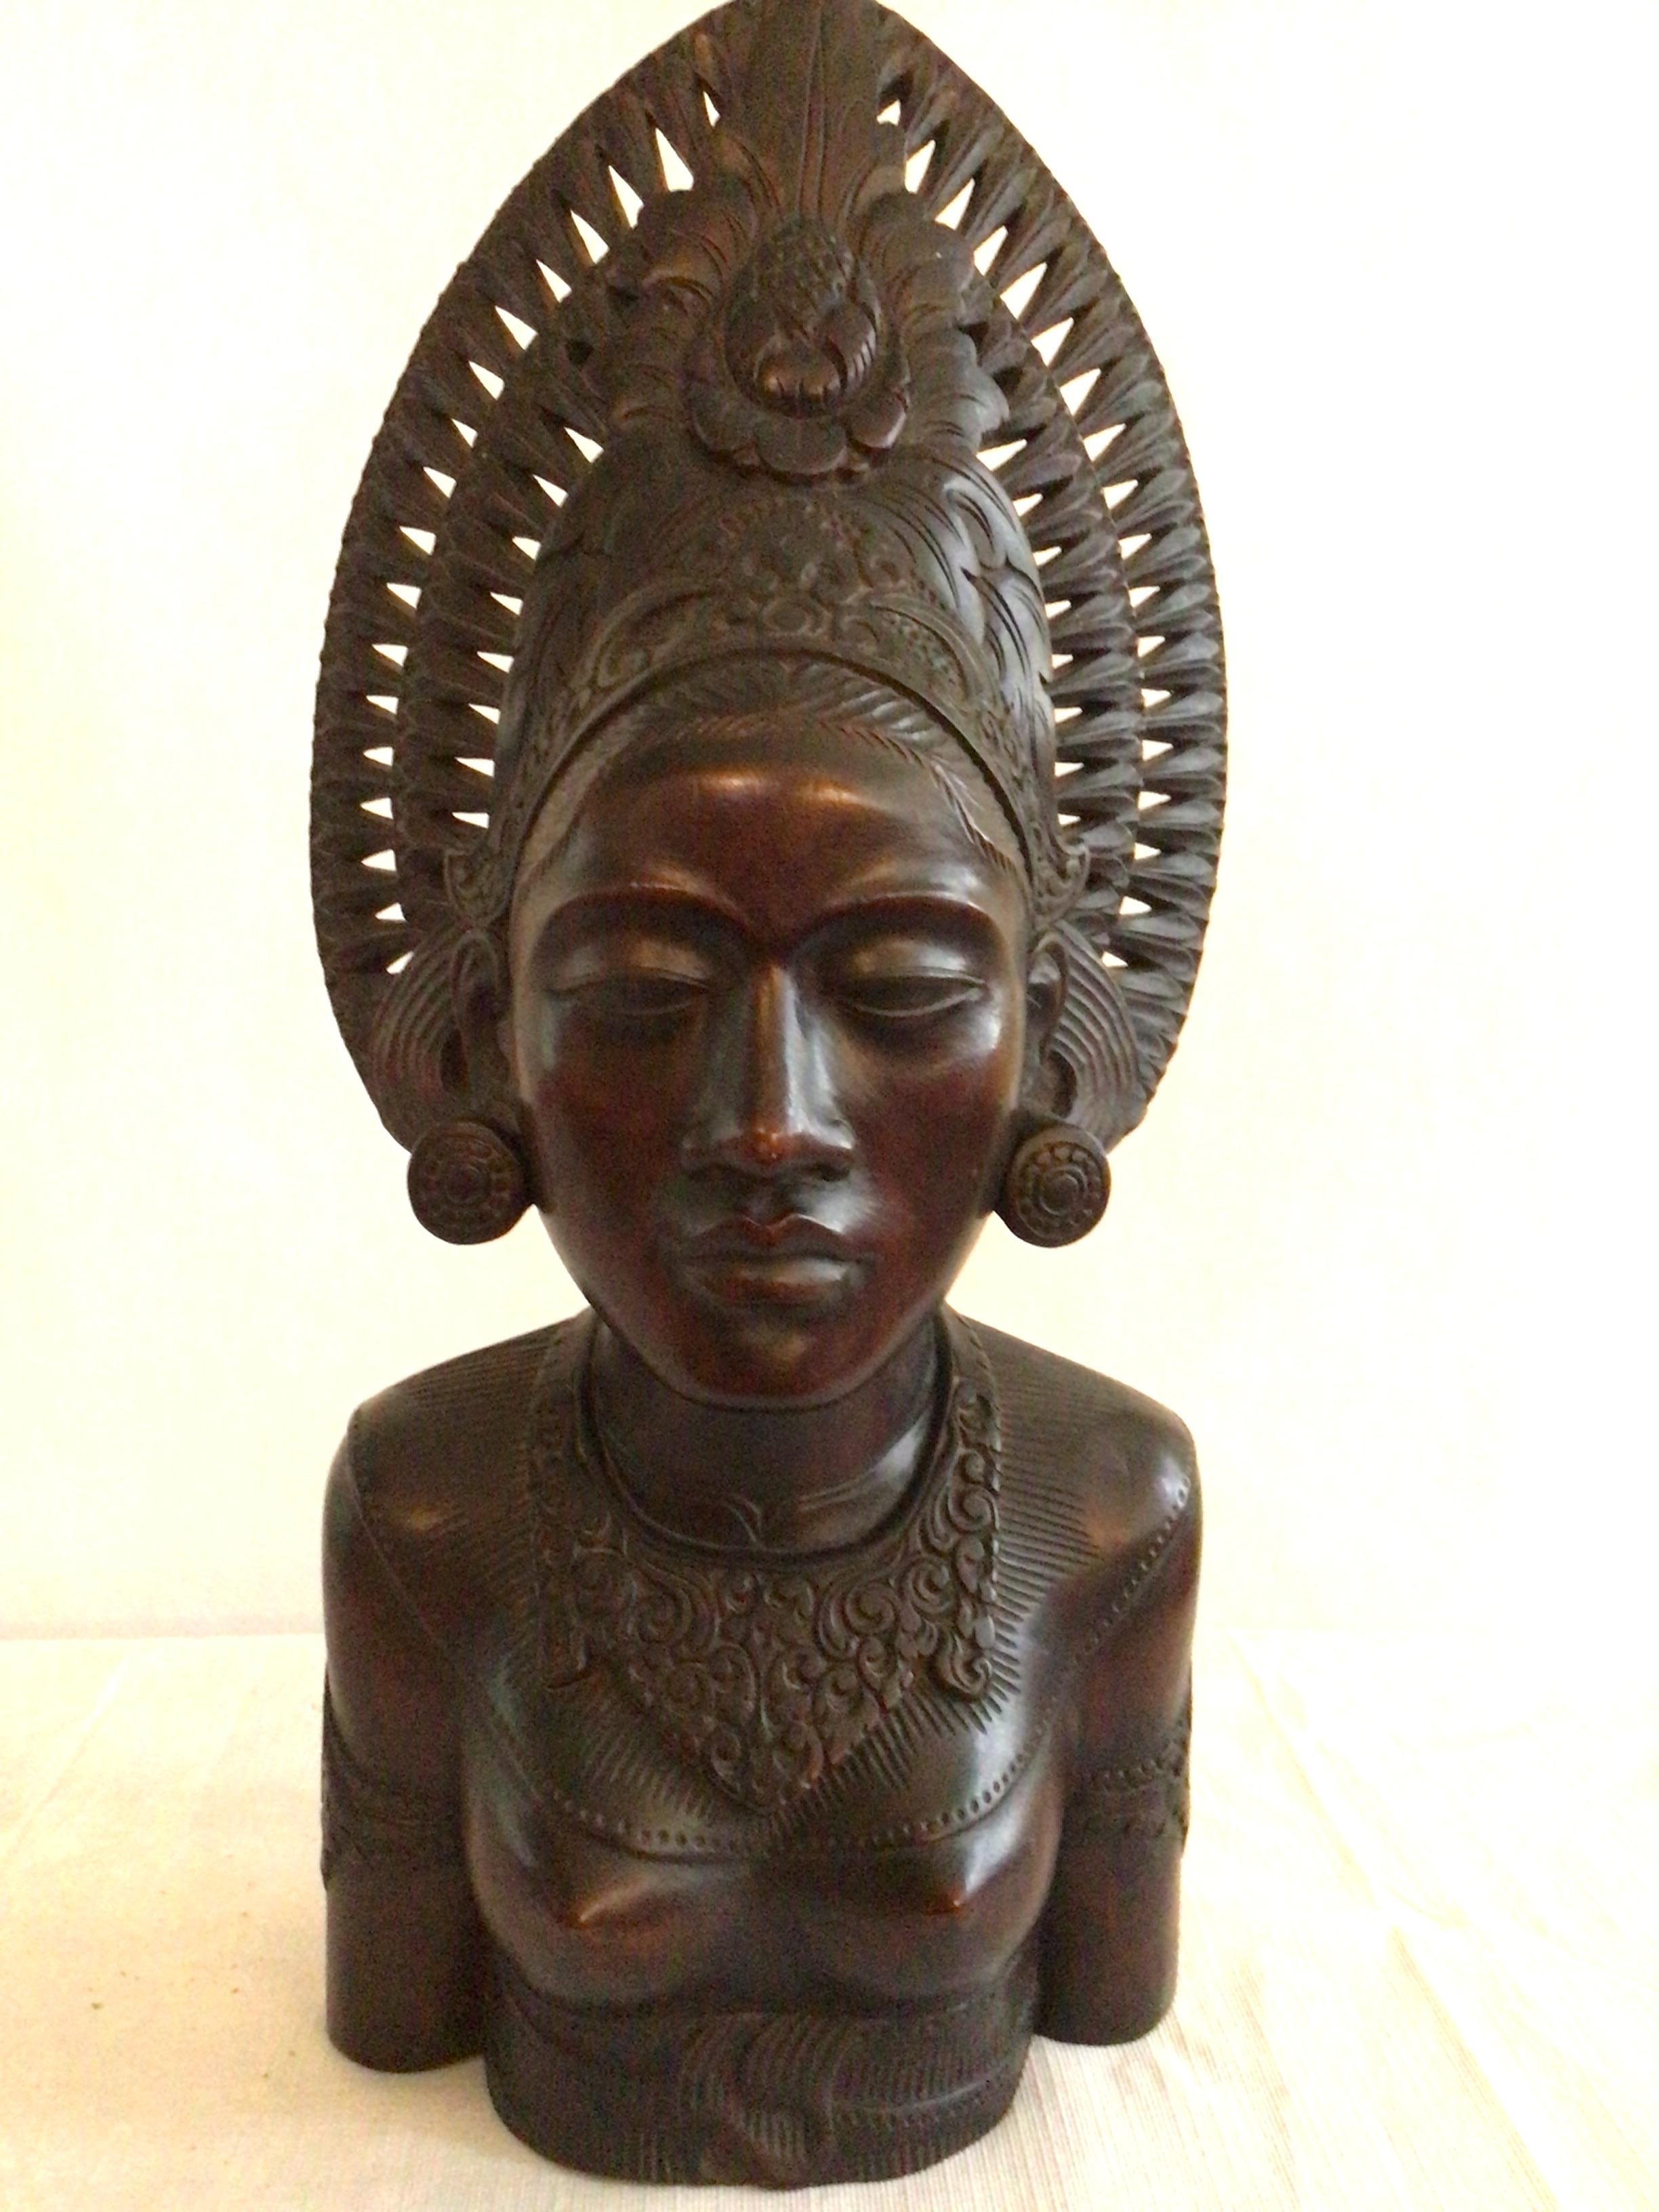 This 1950s finely carved wood statue of a Thai Woman is exquisite from every side. An elaborate headdress with carved openings adds lightness to the piece. Hair is shown tied in the back with a floral rosette. Would look stunning mounted on a Lucite